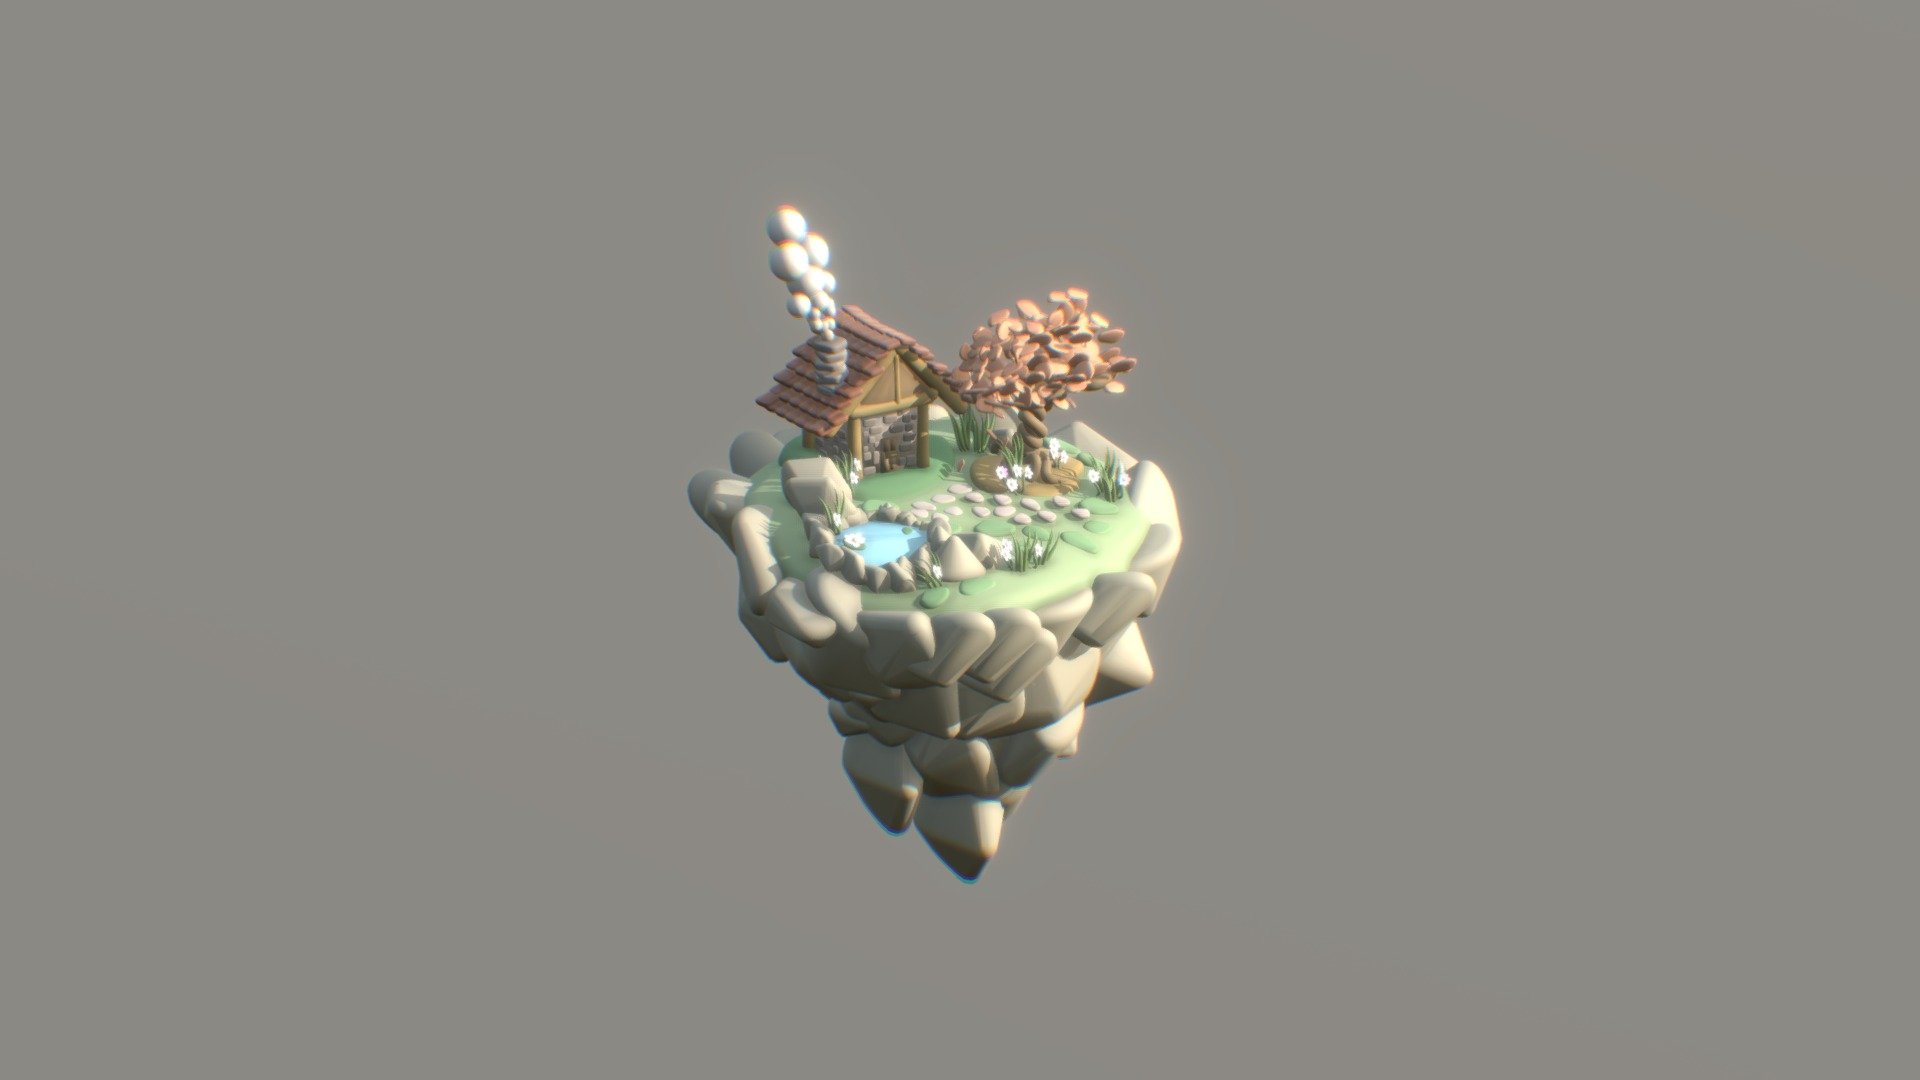 A small floating island made inside gravity sketch (Modelled in Virtual Reality) 3d model